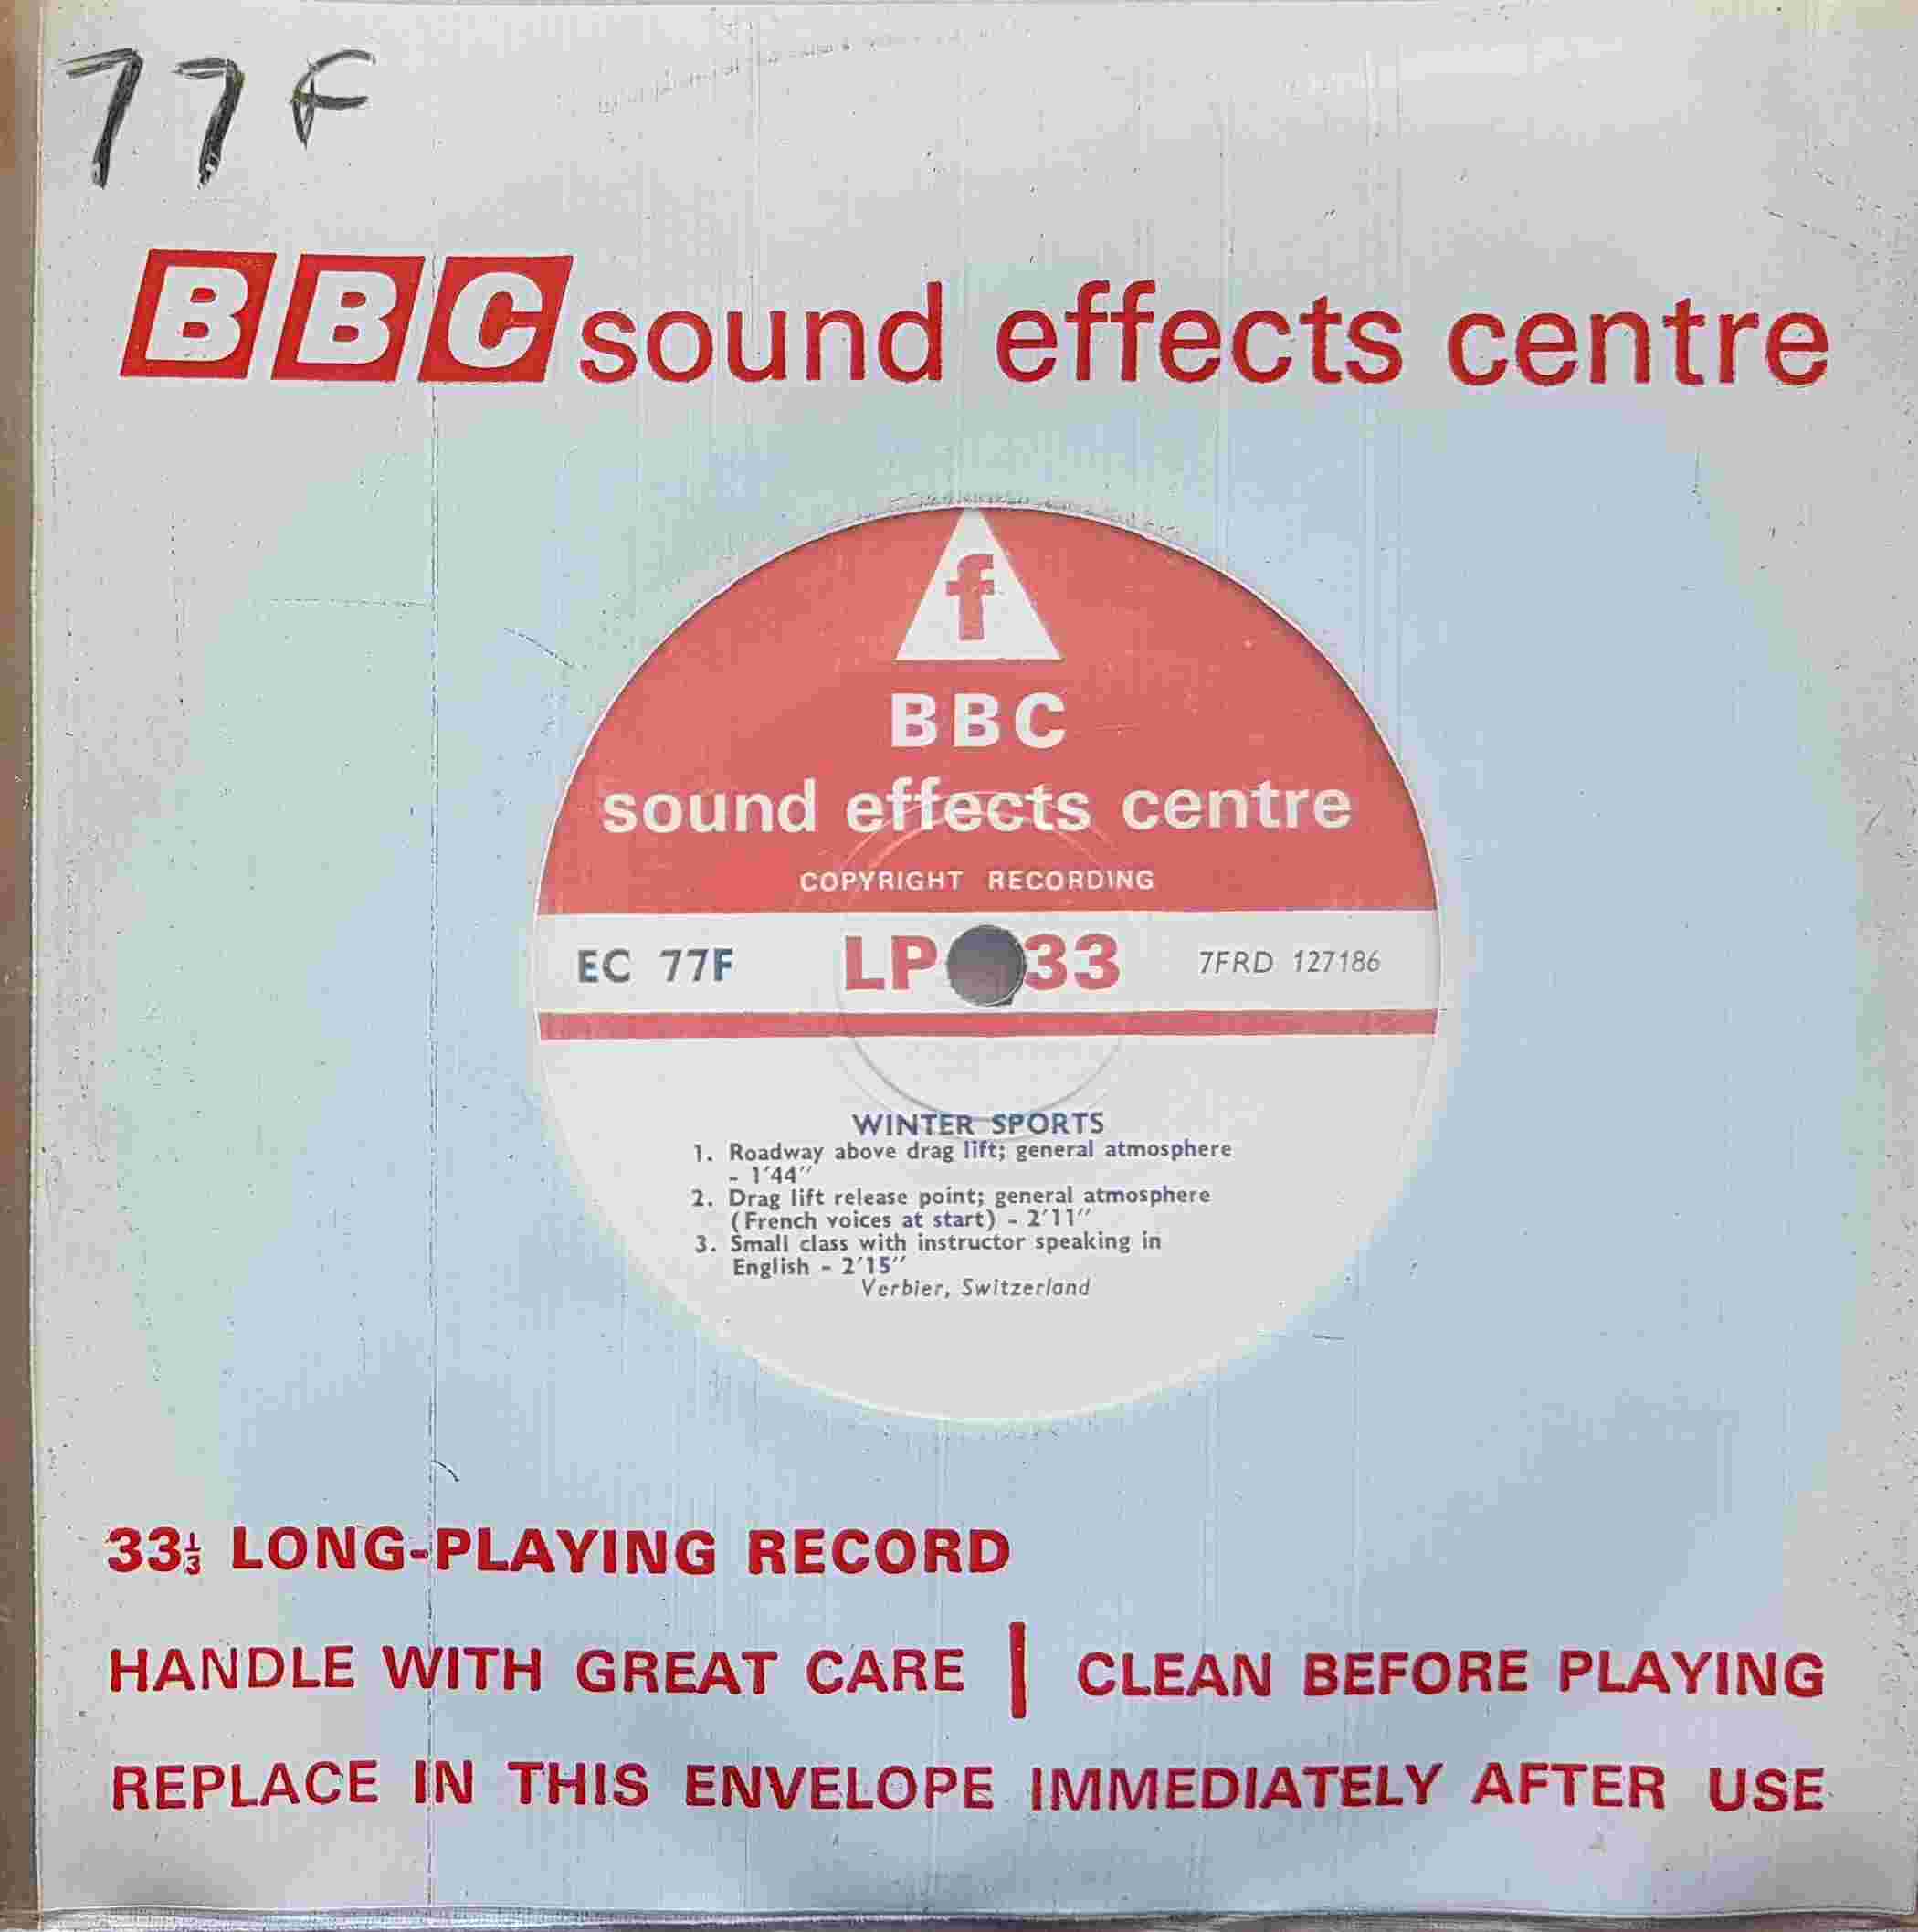 Picture of EC 77F Winter sports (Verbier, Switzerland) by artist Not registered from the BBC singles - Records and Tapes library